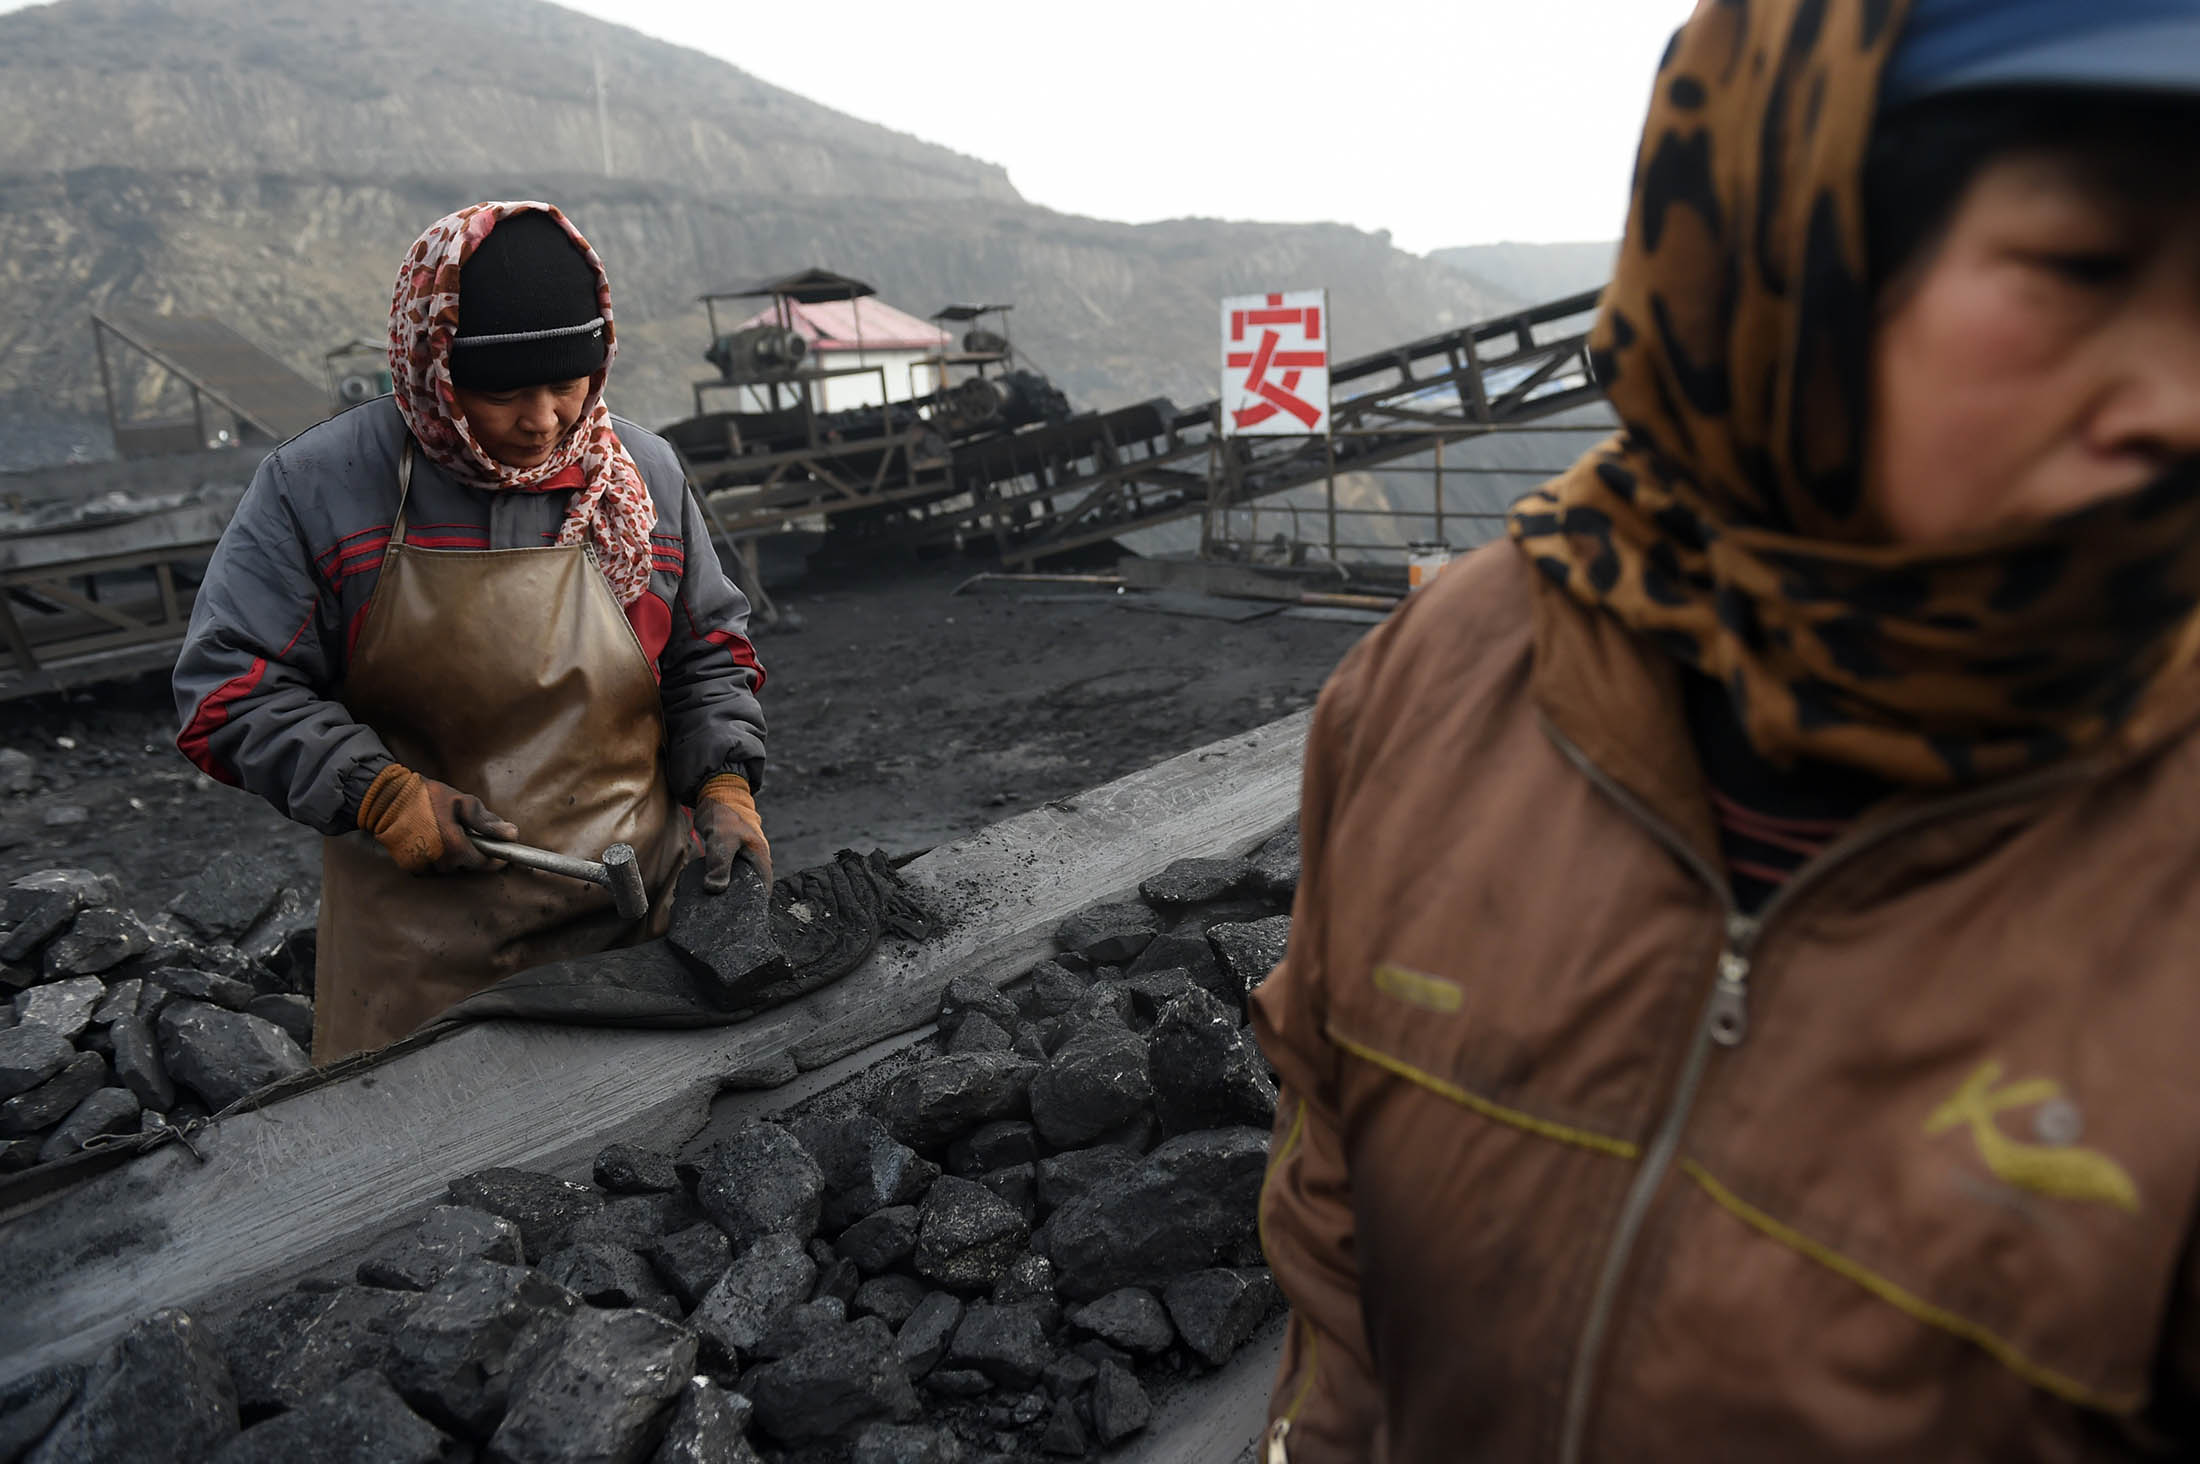 Workers sort coal on a conveyer belt, near a coal mine at Datong, in China's northern Shanxi province. China will suspend the approval of new mines starting in 2016 and will cut coal’s share of its energy consumption to 62.6 percent next year.
